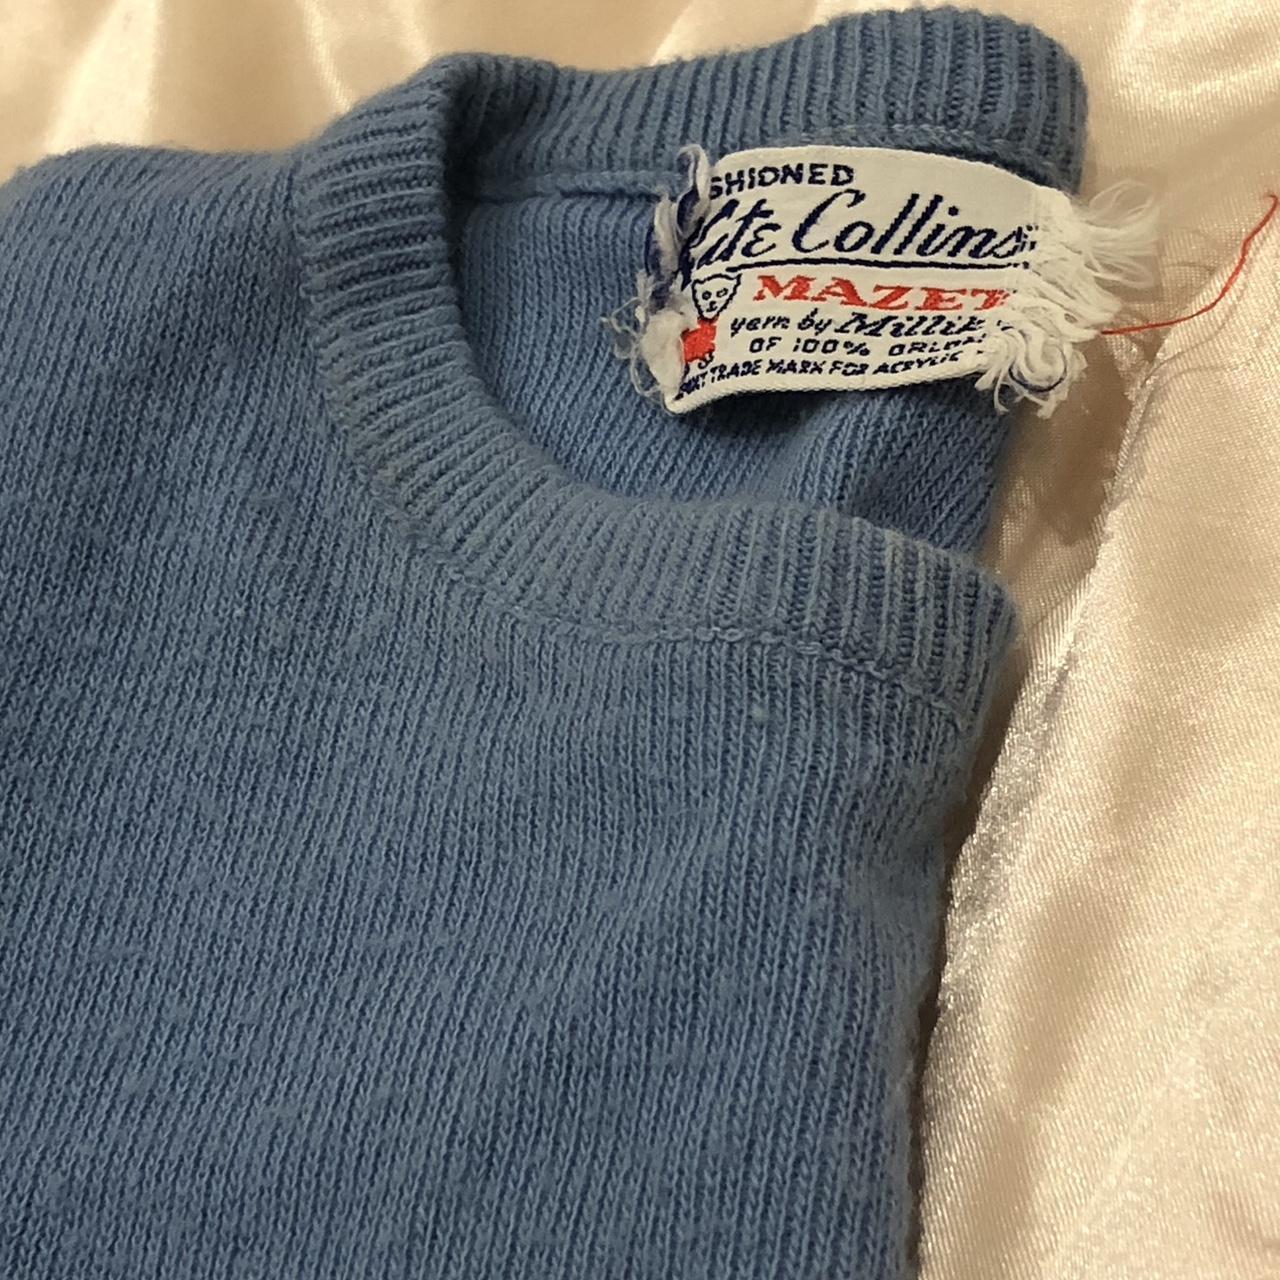 Vintage blue babydoll sweater 💅💅 Small stain on the... - Depop